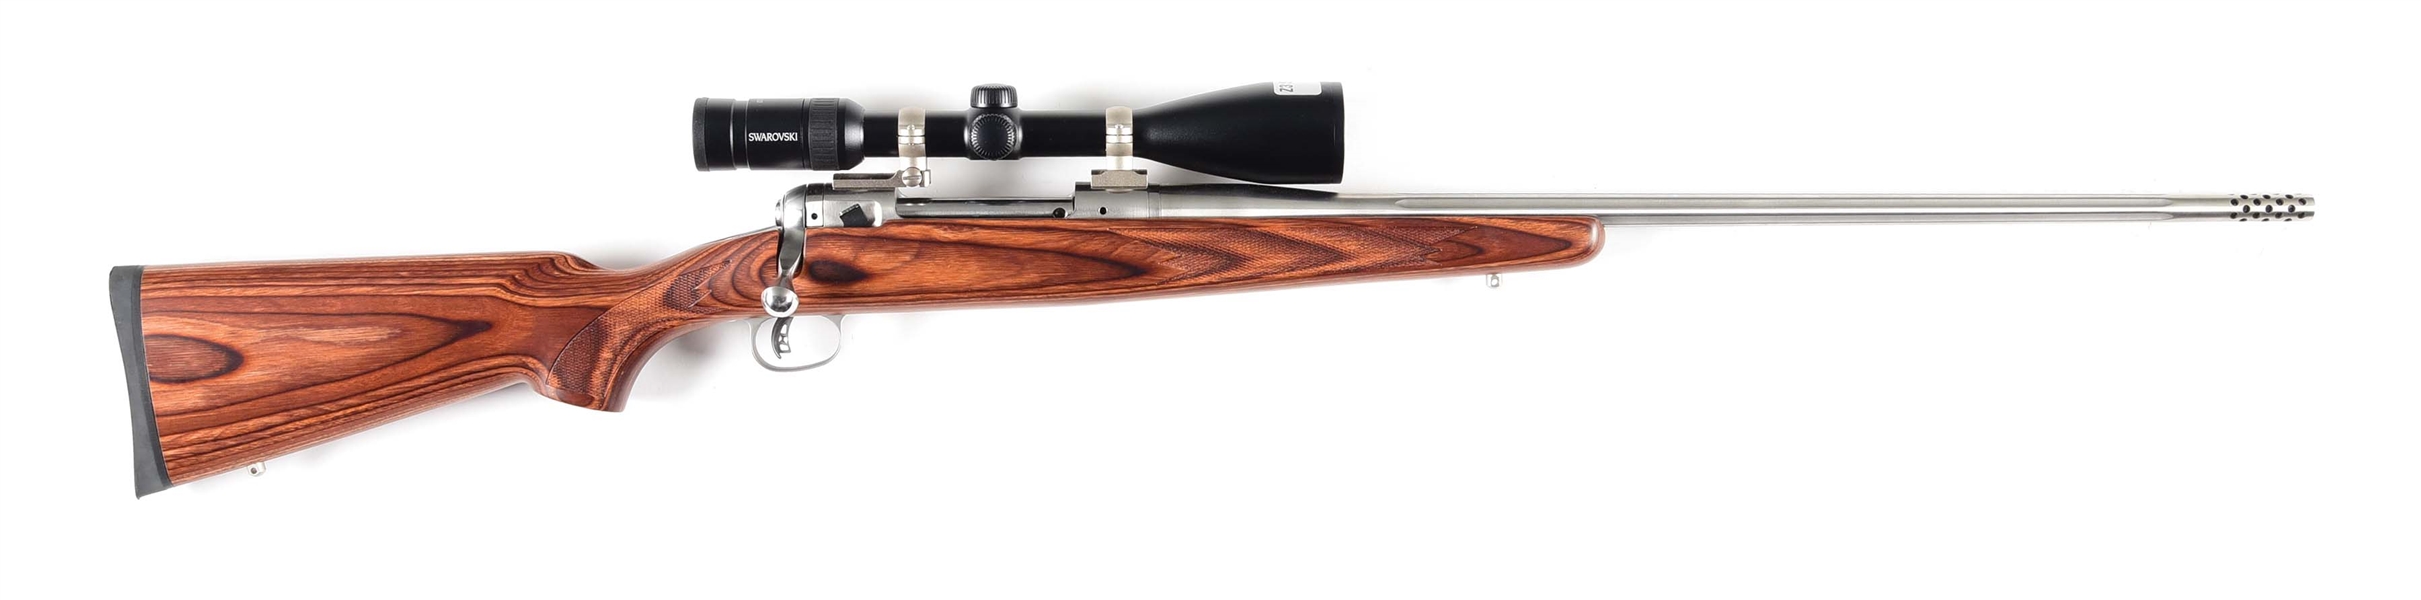 (M) ER SHAW MARK VII BOLT ACTION RIFLE WITH SCOPE.